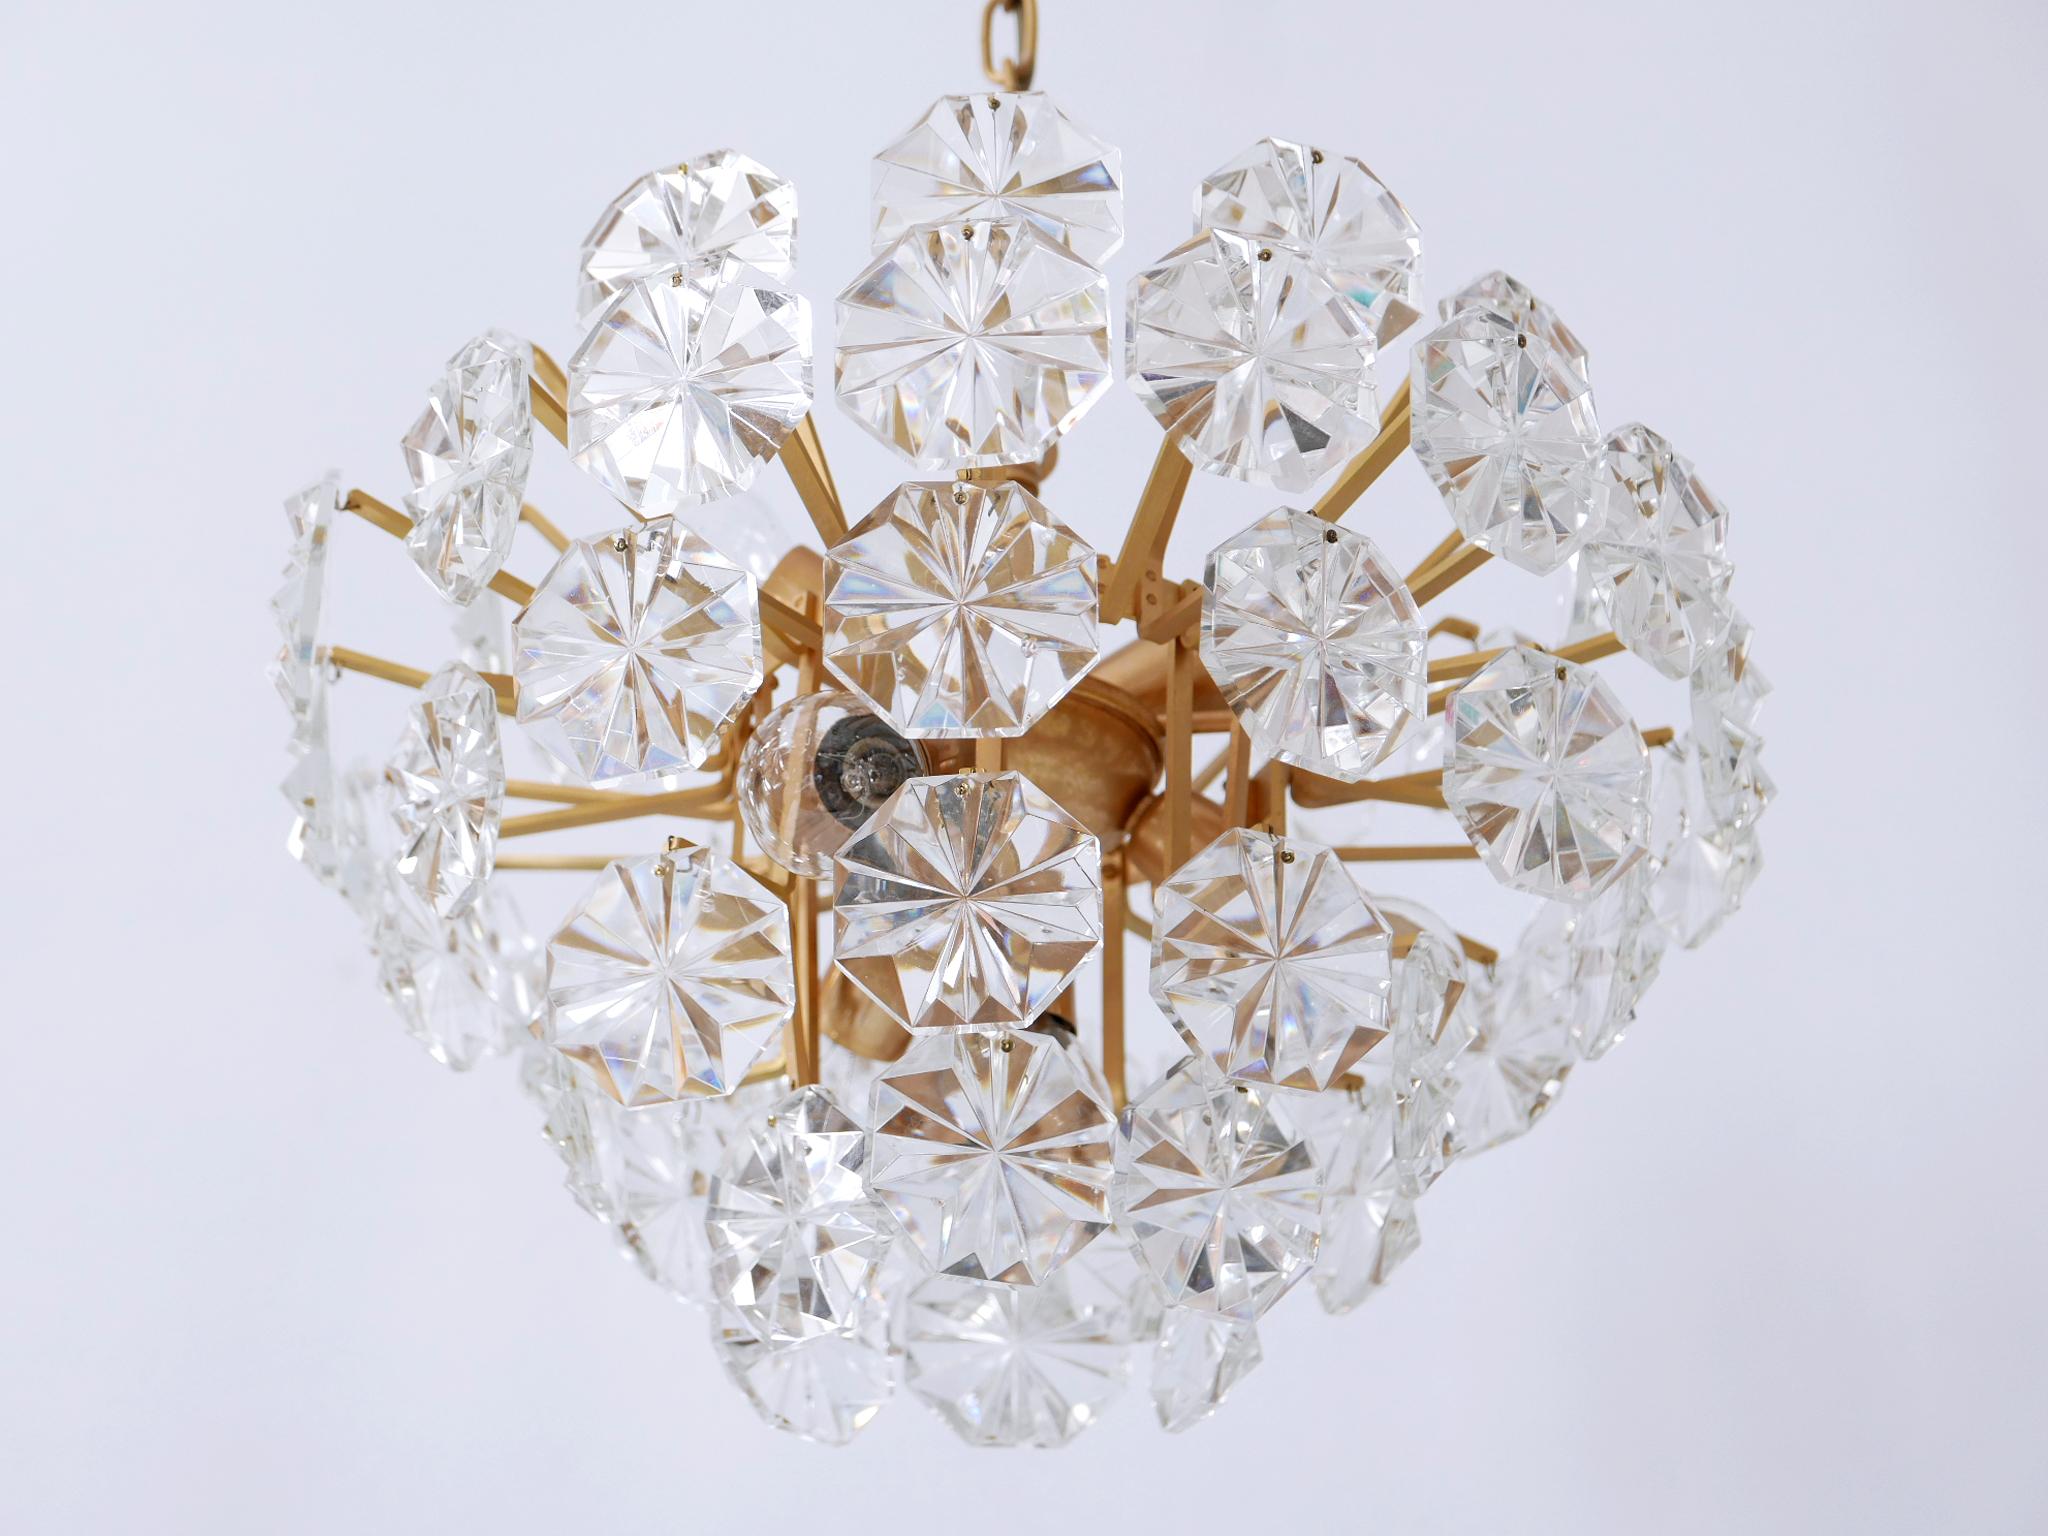 Elegant Mid Century Modern Crystal Chandelier by Christoph Palme Germany 1970s For Sale 4